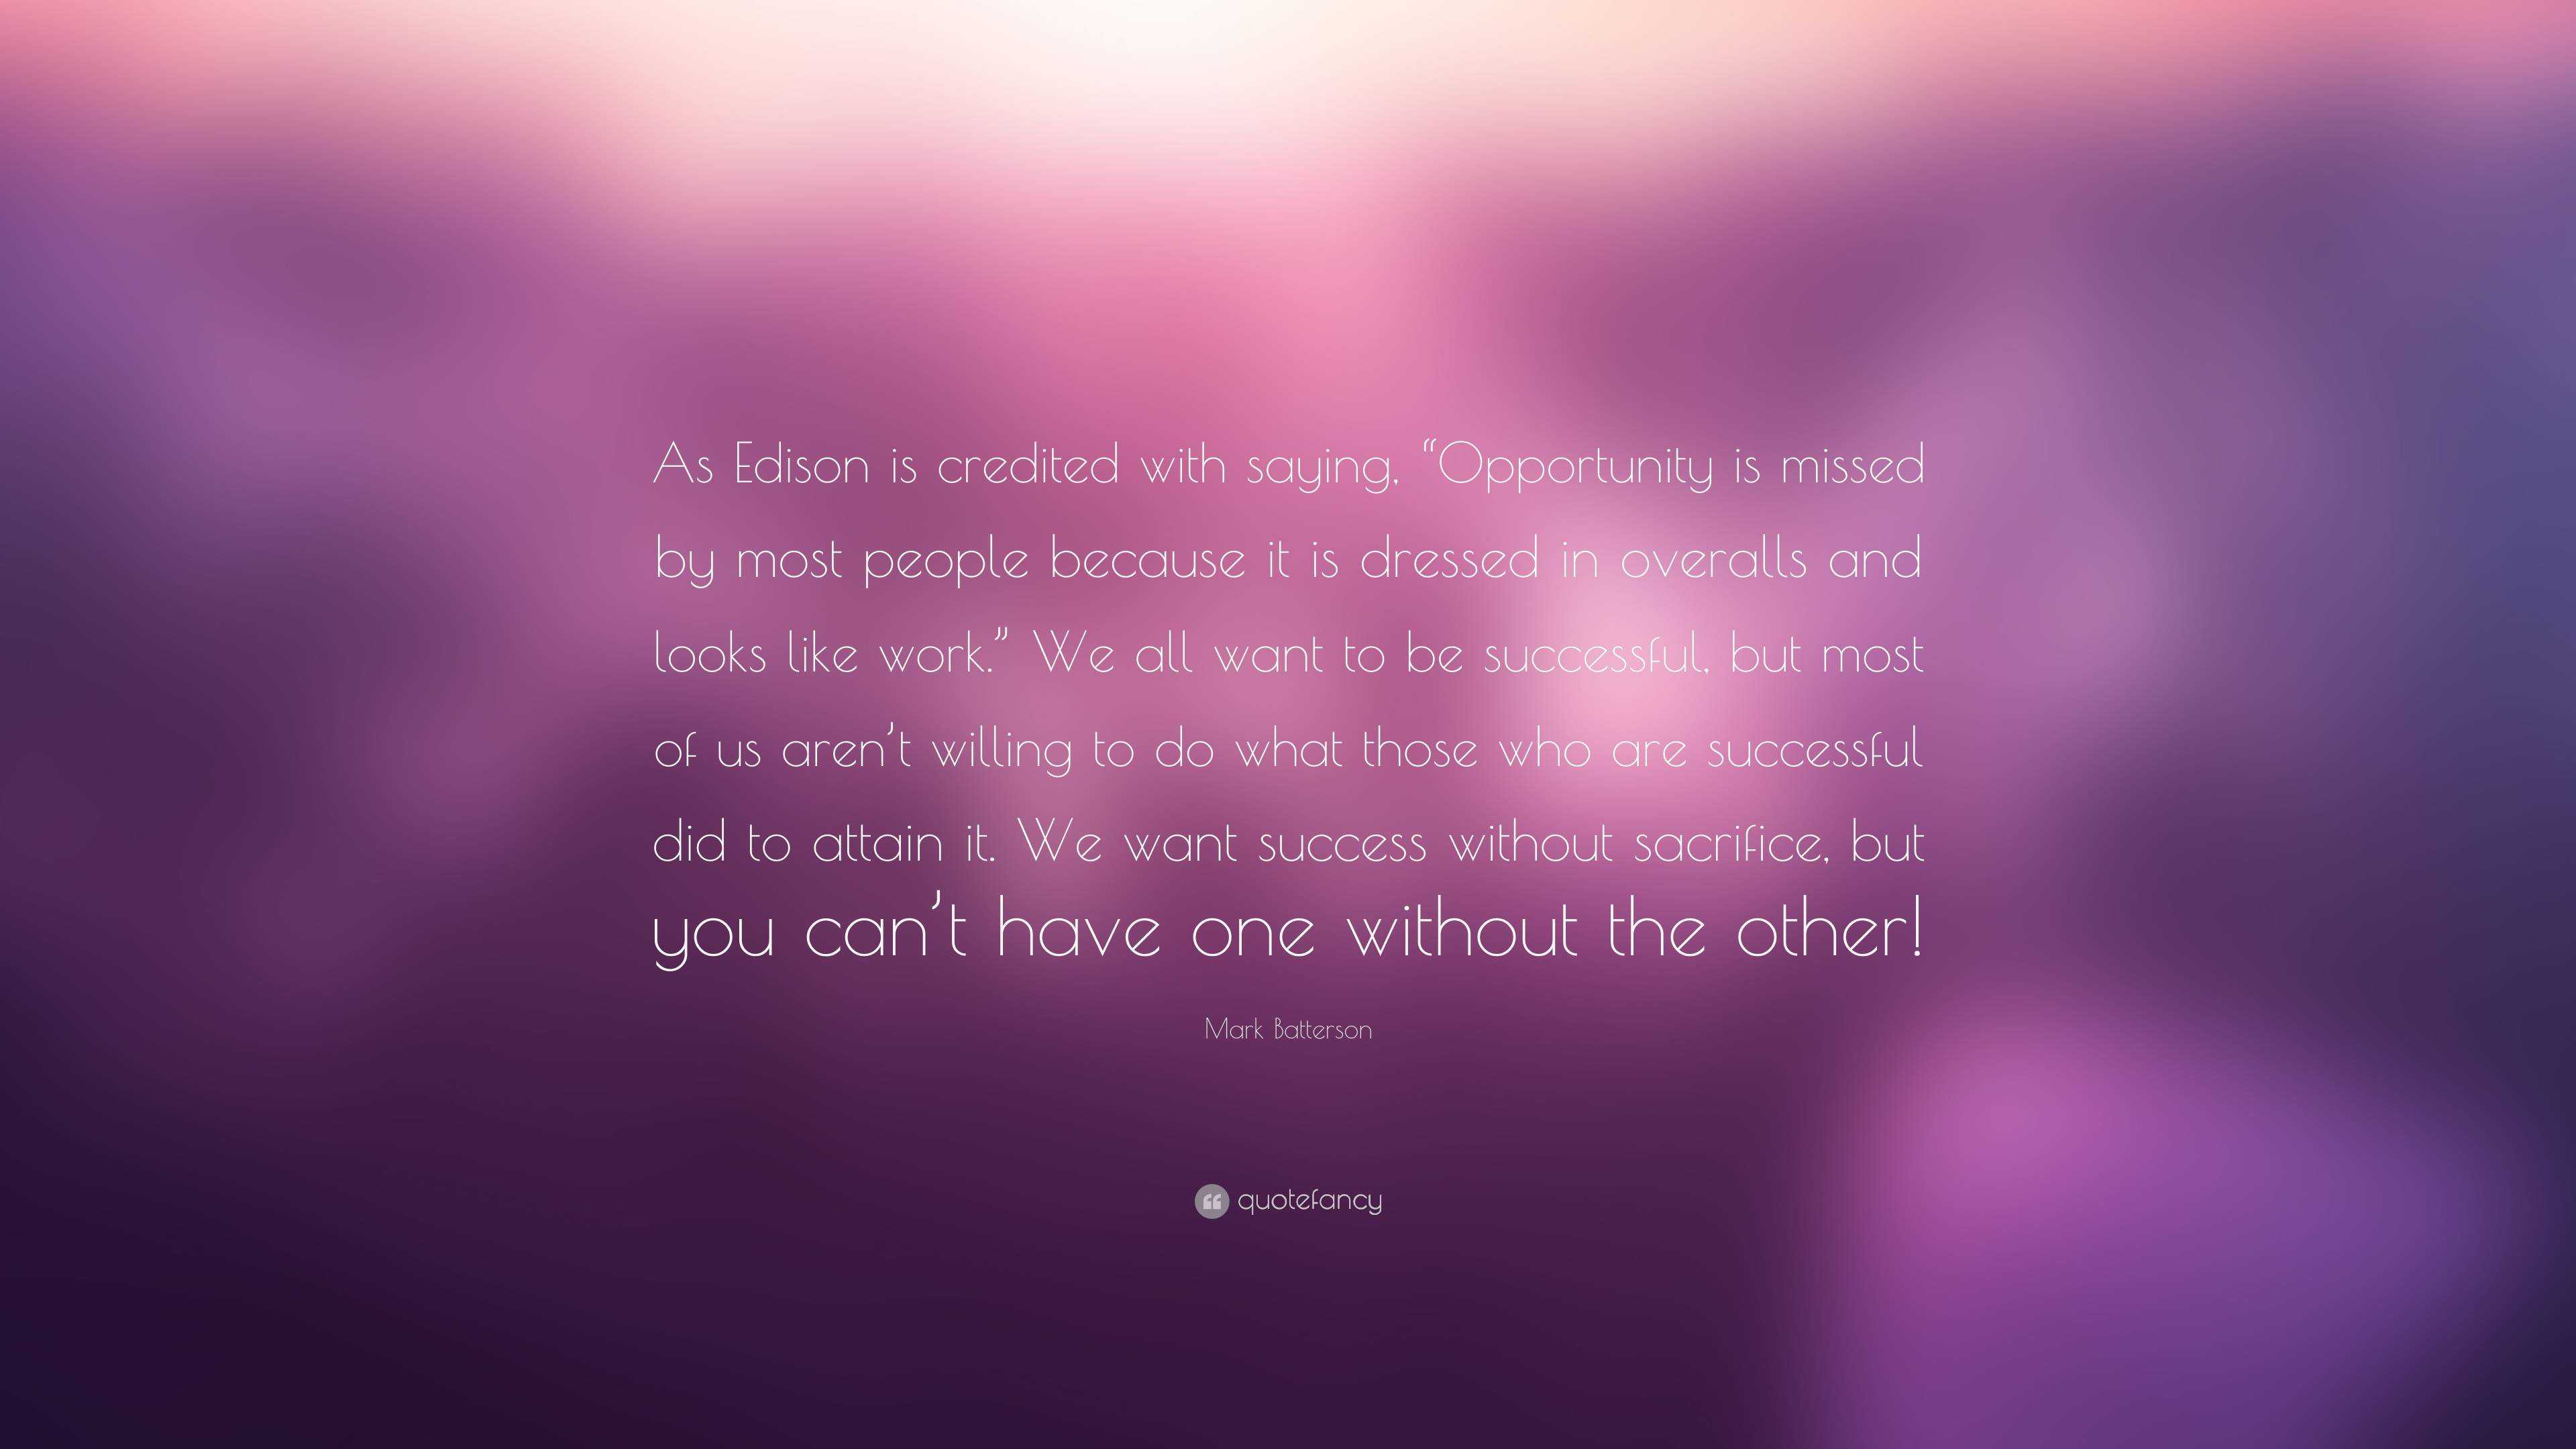 Mark Batterson Quote: “As Edison is credited with saying, “Opportunity ...